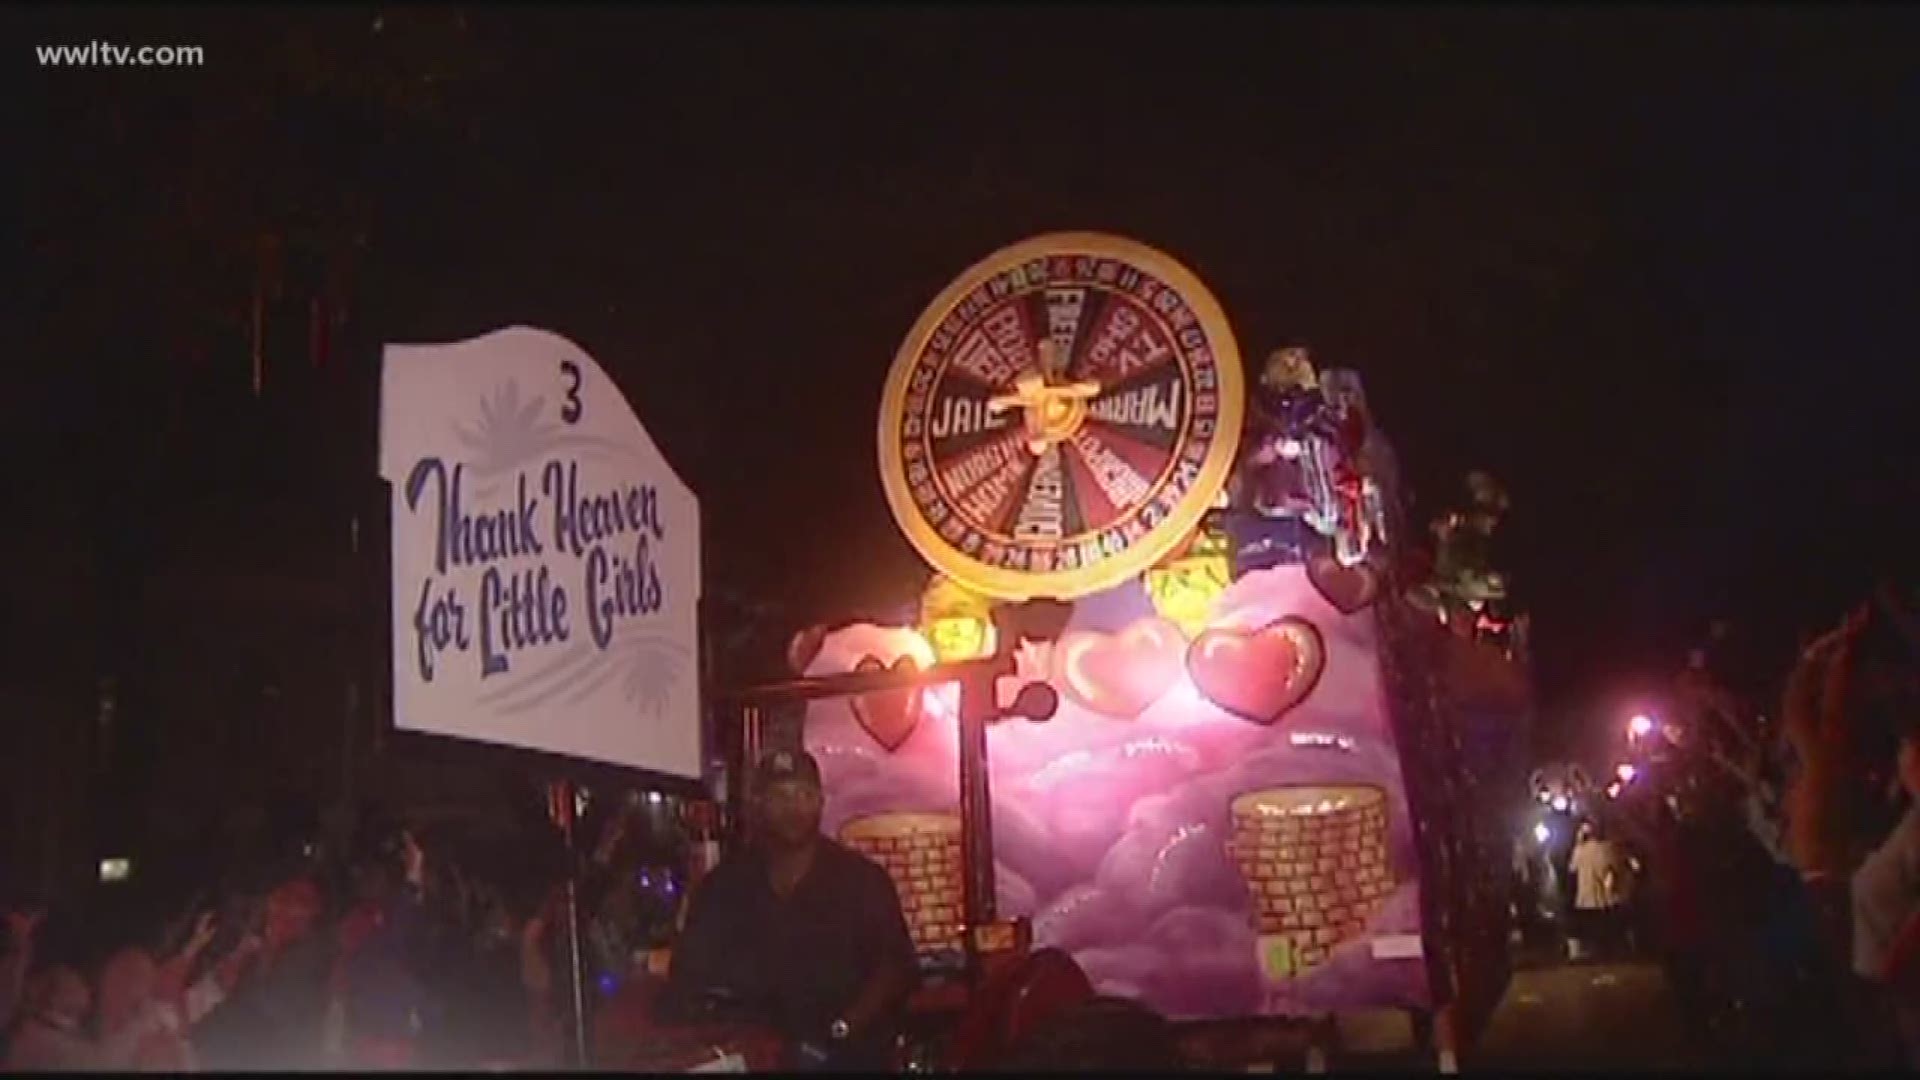 If there is one thing Mardi Gras in New Orleans is about, it's making fun of a bad situation.